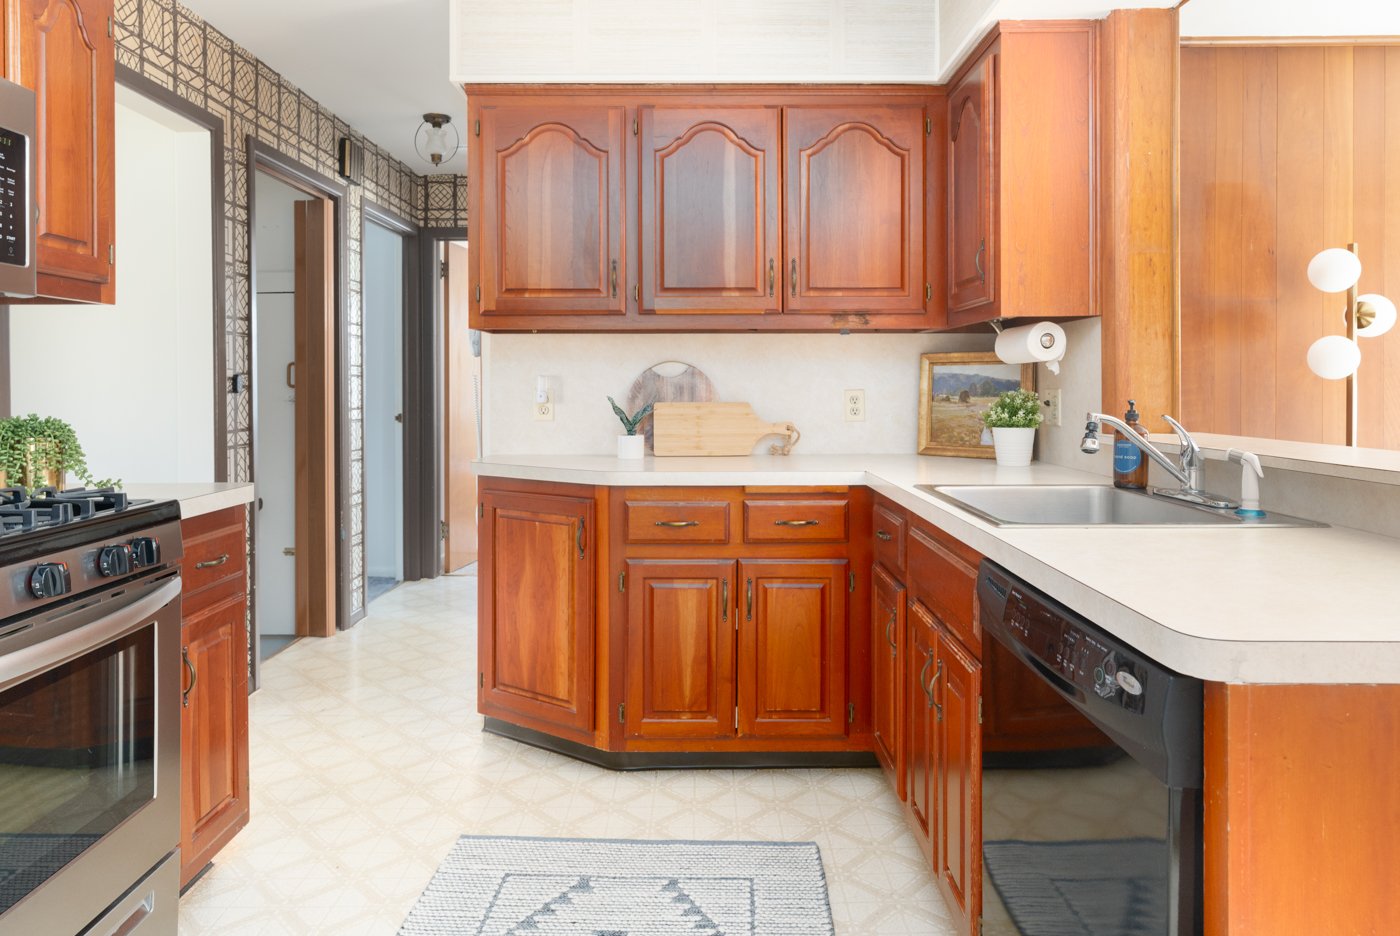 KITCHEN 1354 Brookfall real estate (Low res) (5 of 42).jpg